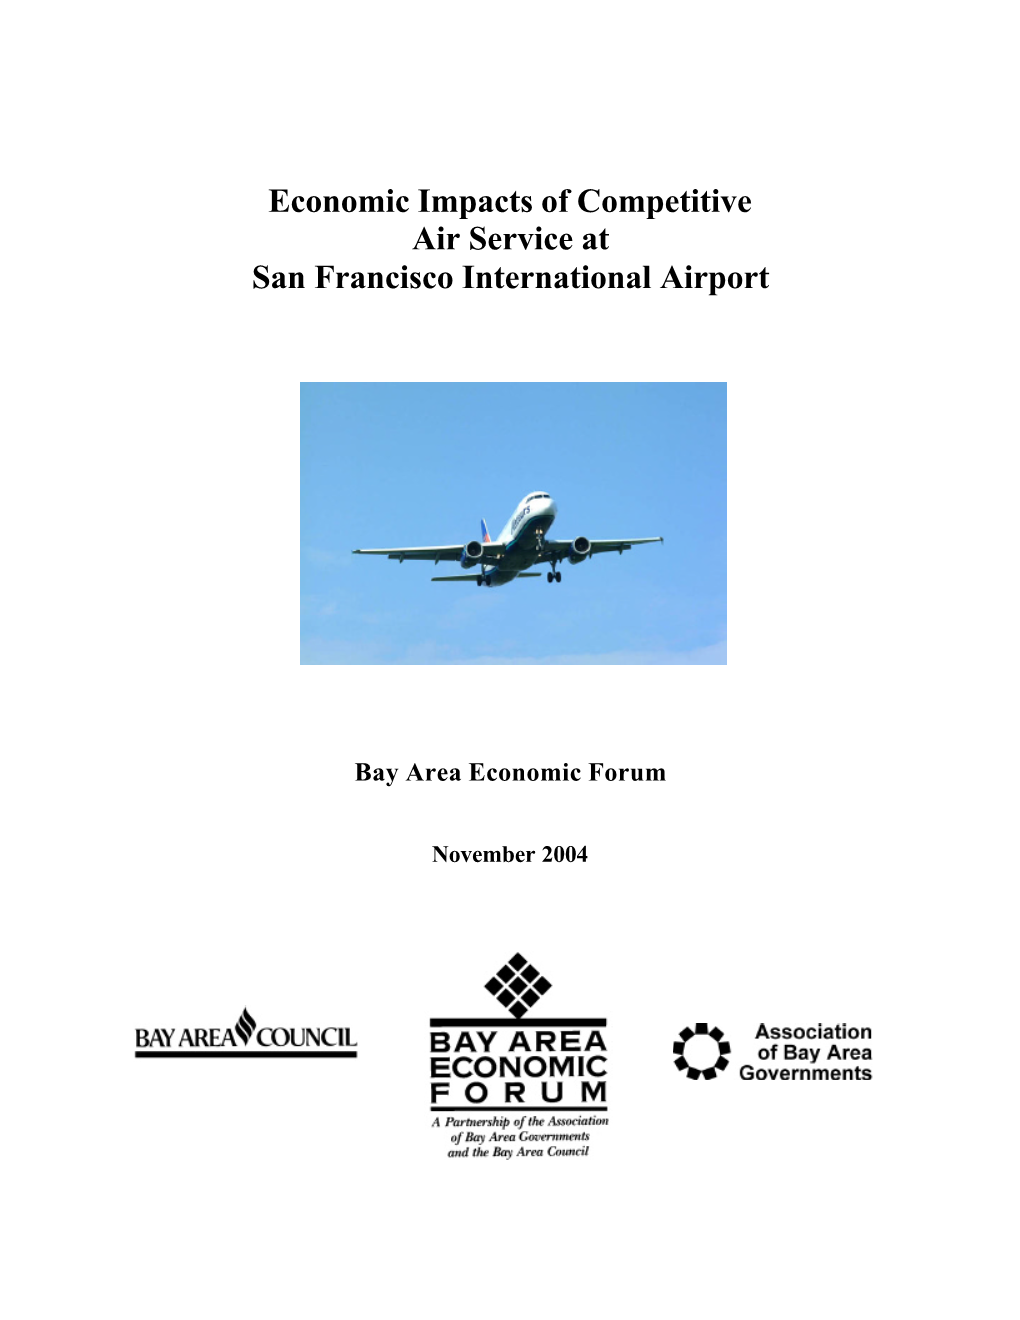 Economic Impacts of Competitive Air Service at San Francisco International Airport